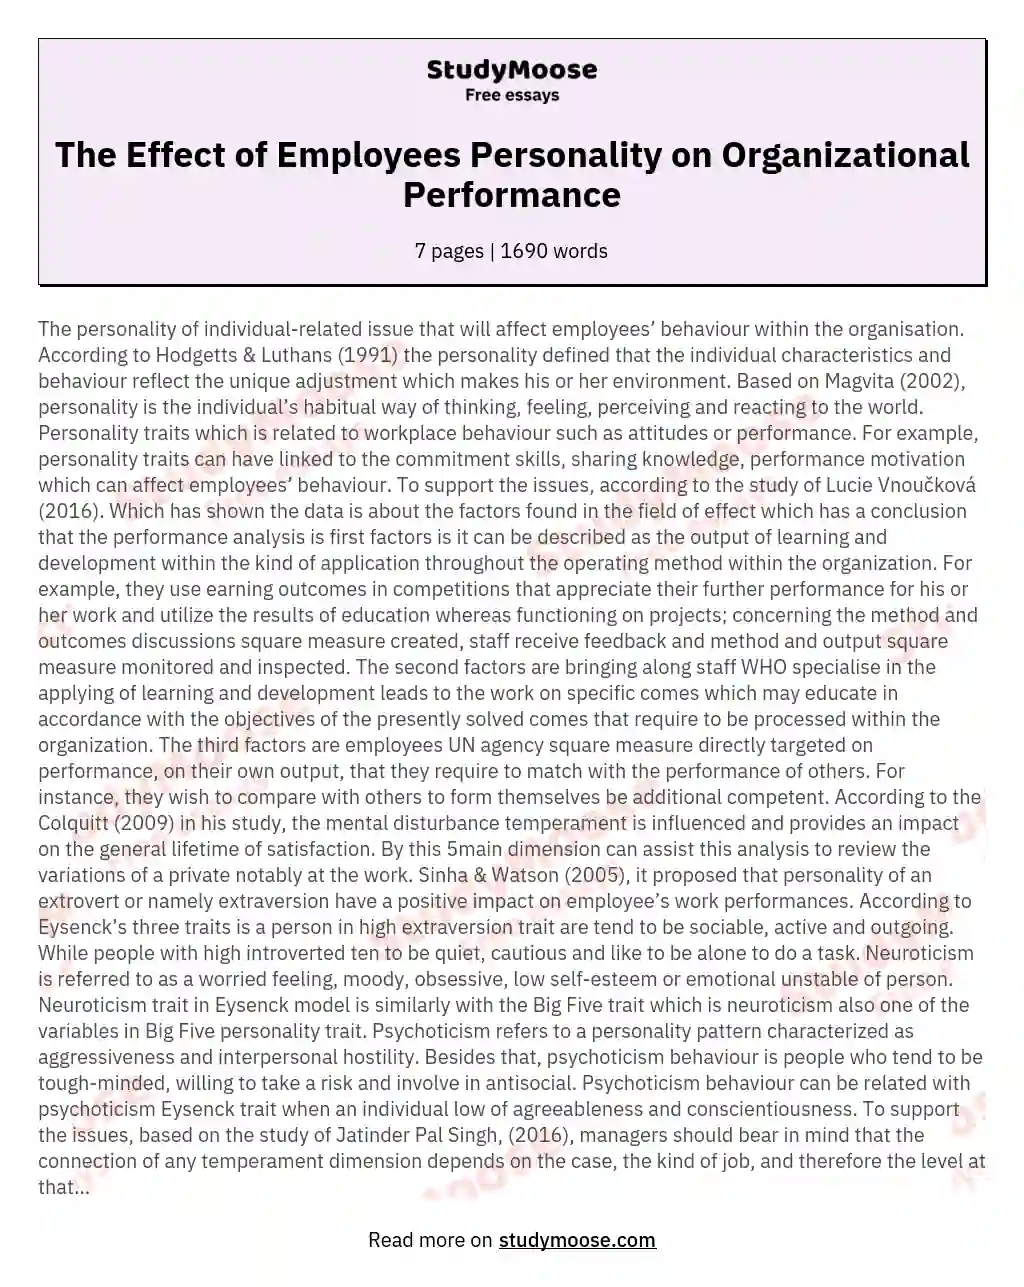 The Effect of Employees Personality on Organizational Performance essay